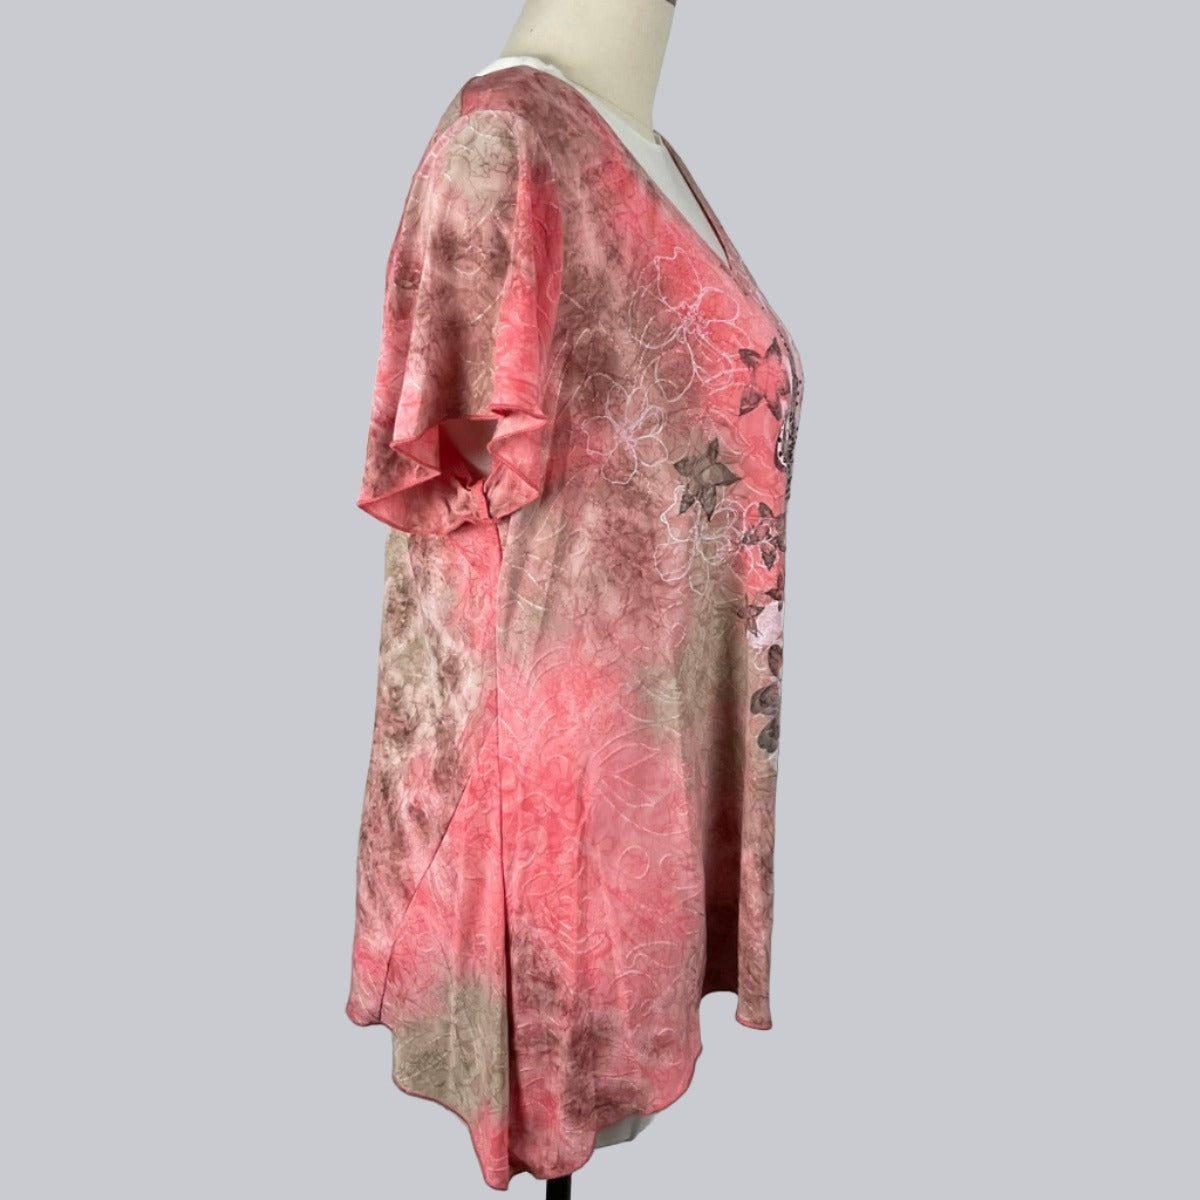 Women's Pink & Beige Embellished Floral Top  Size 2X - Right Side View